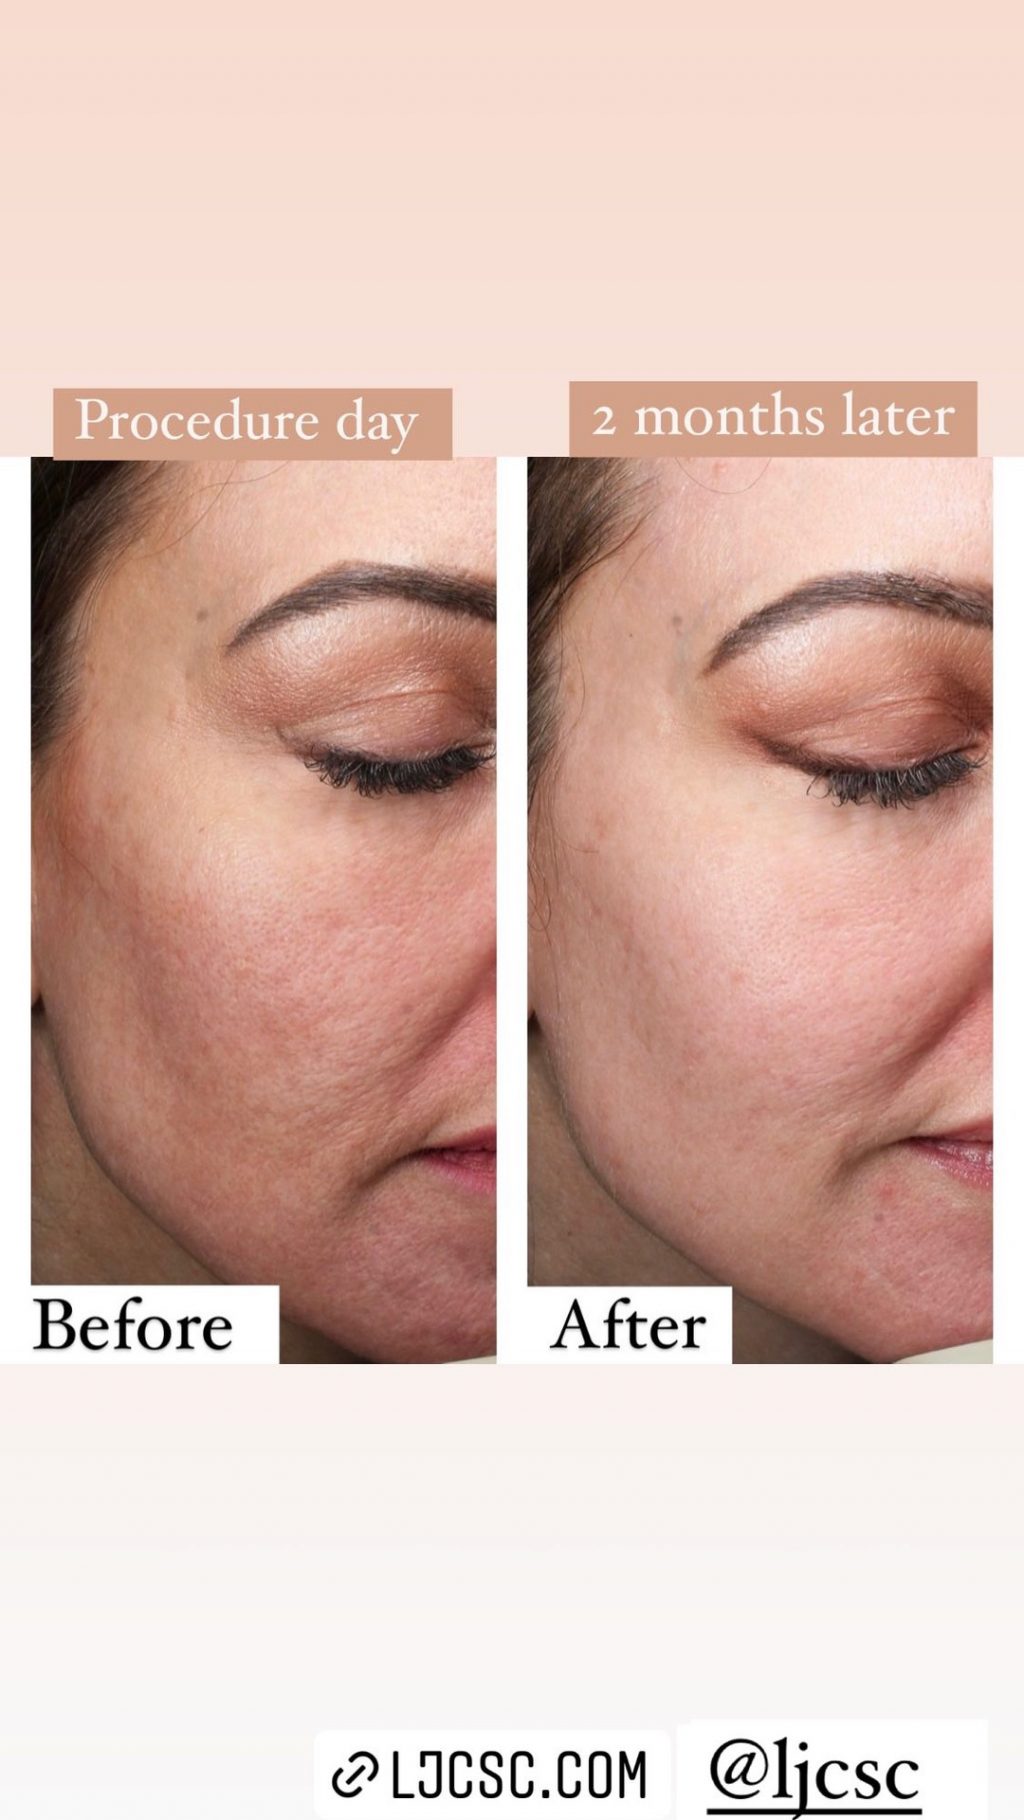 Side-by-side close-ups of the side of Lisa's face before (left) and two months after (right) laser treatments